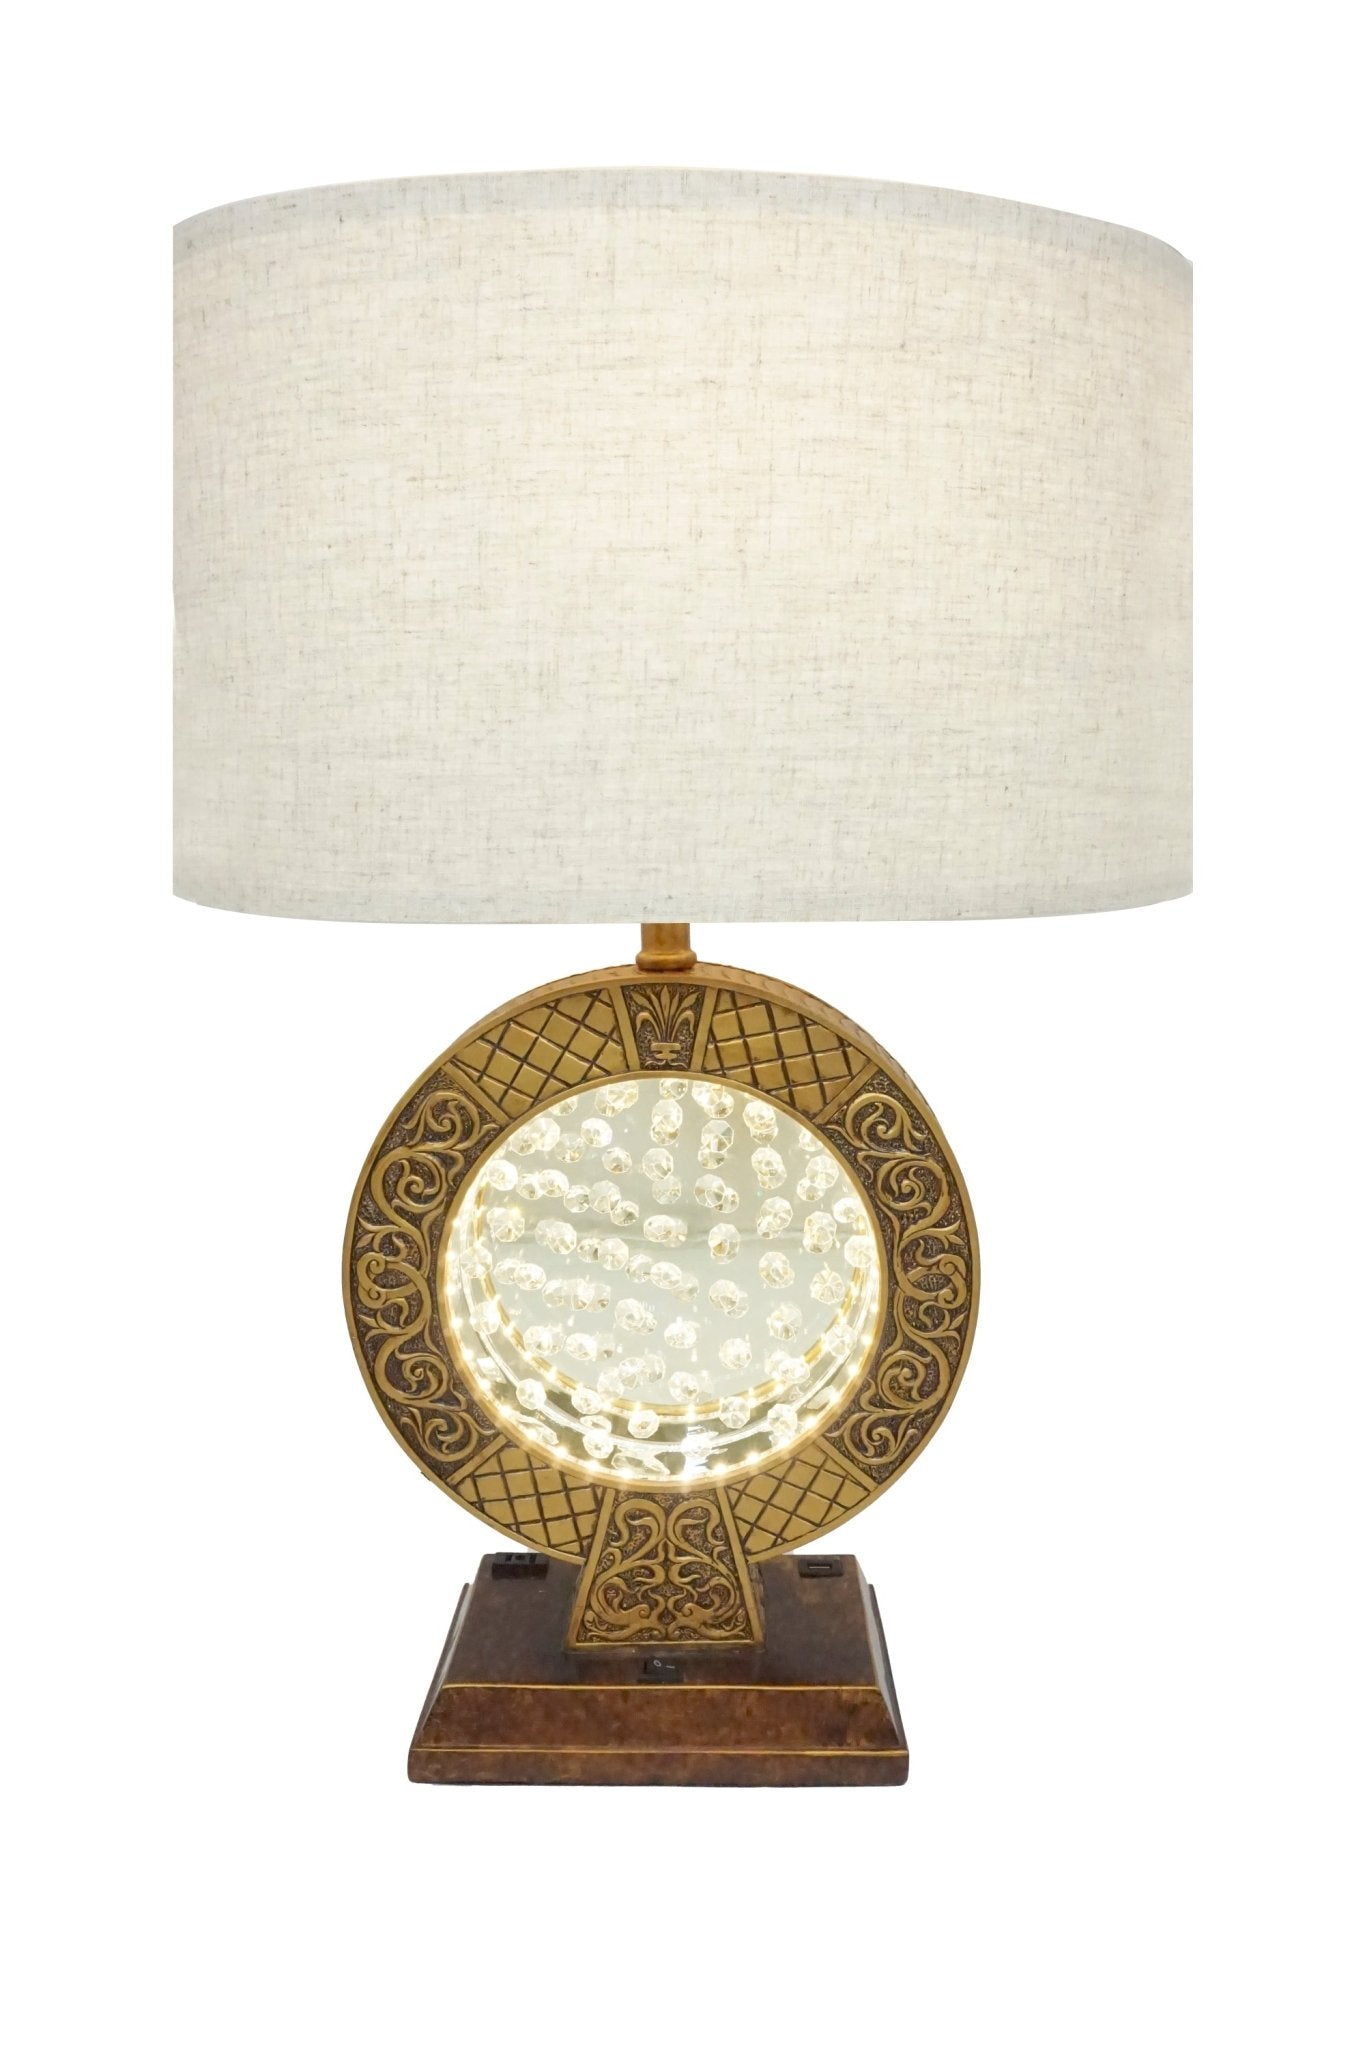 28" Antique polyresin Table Lamp WITH FLOATING CRYSTAL DECOR ON CENTER - Groovy Boardz